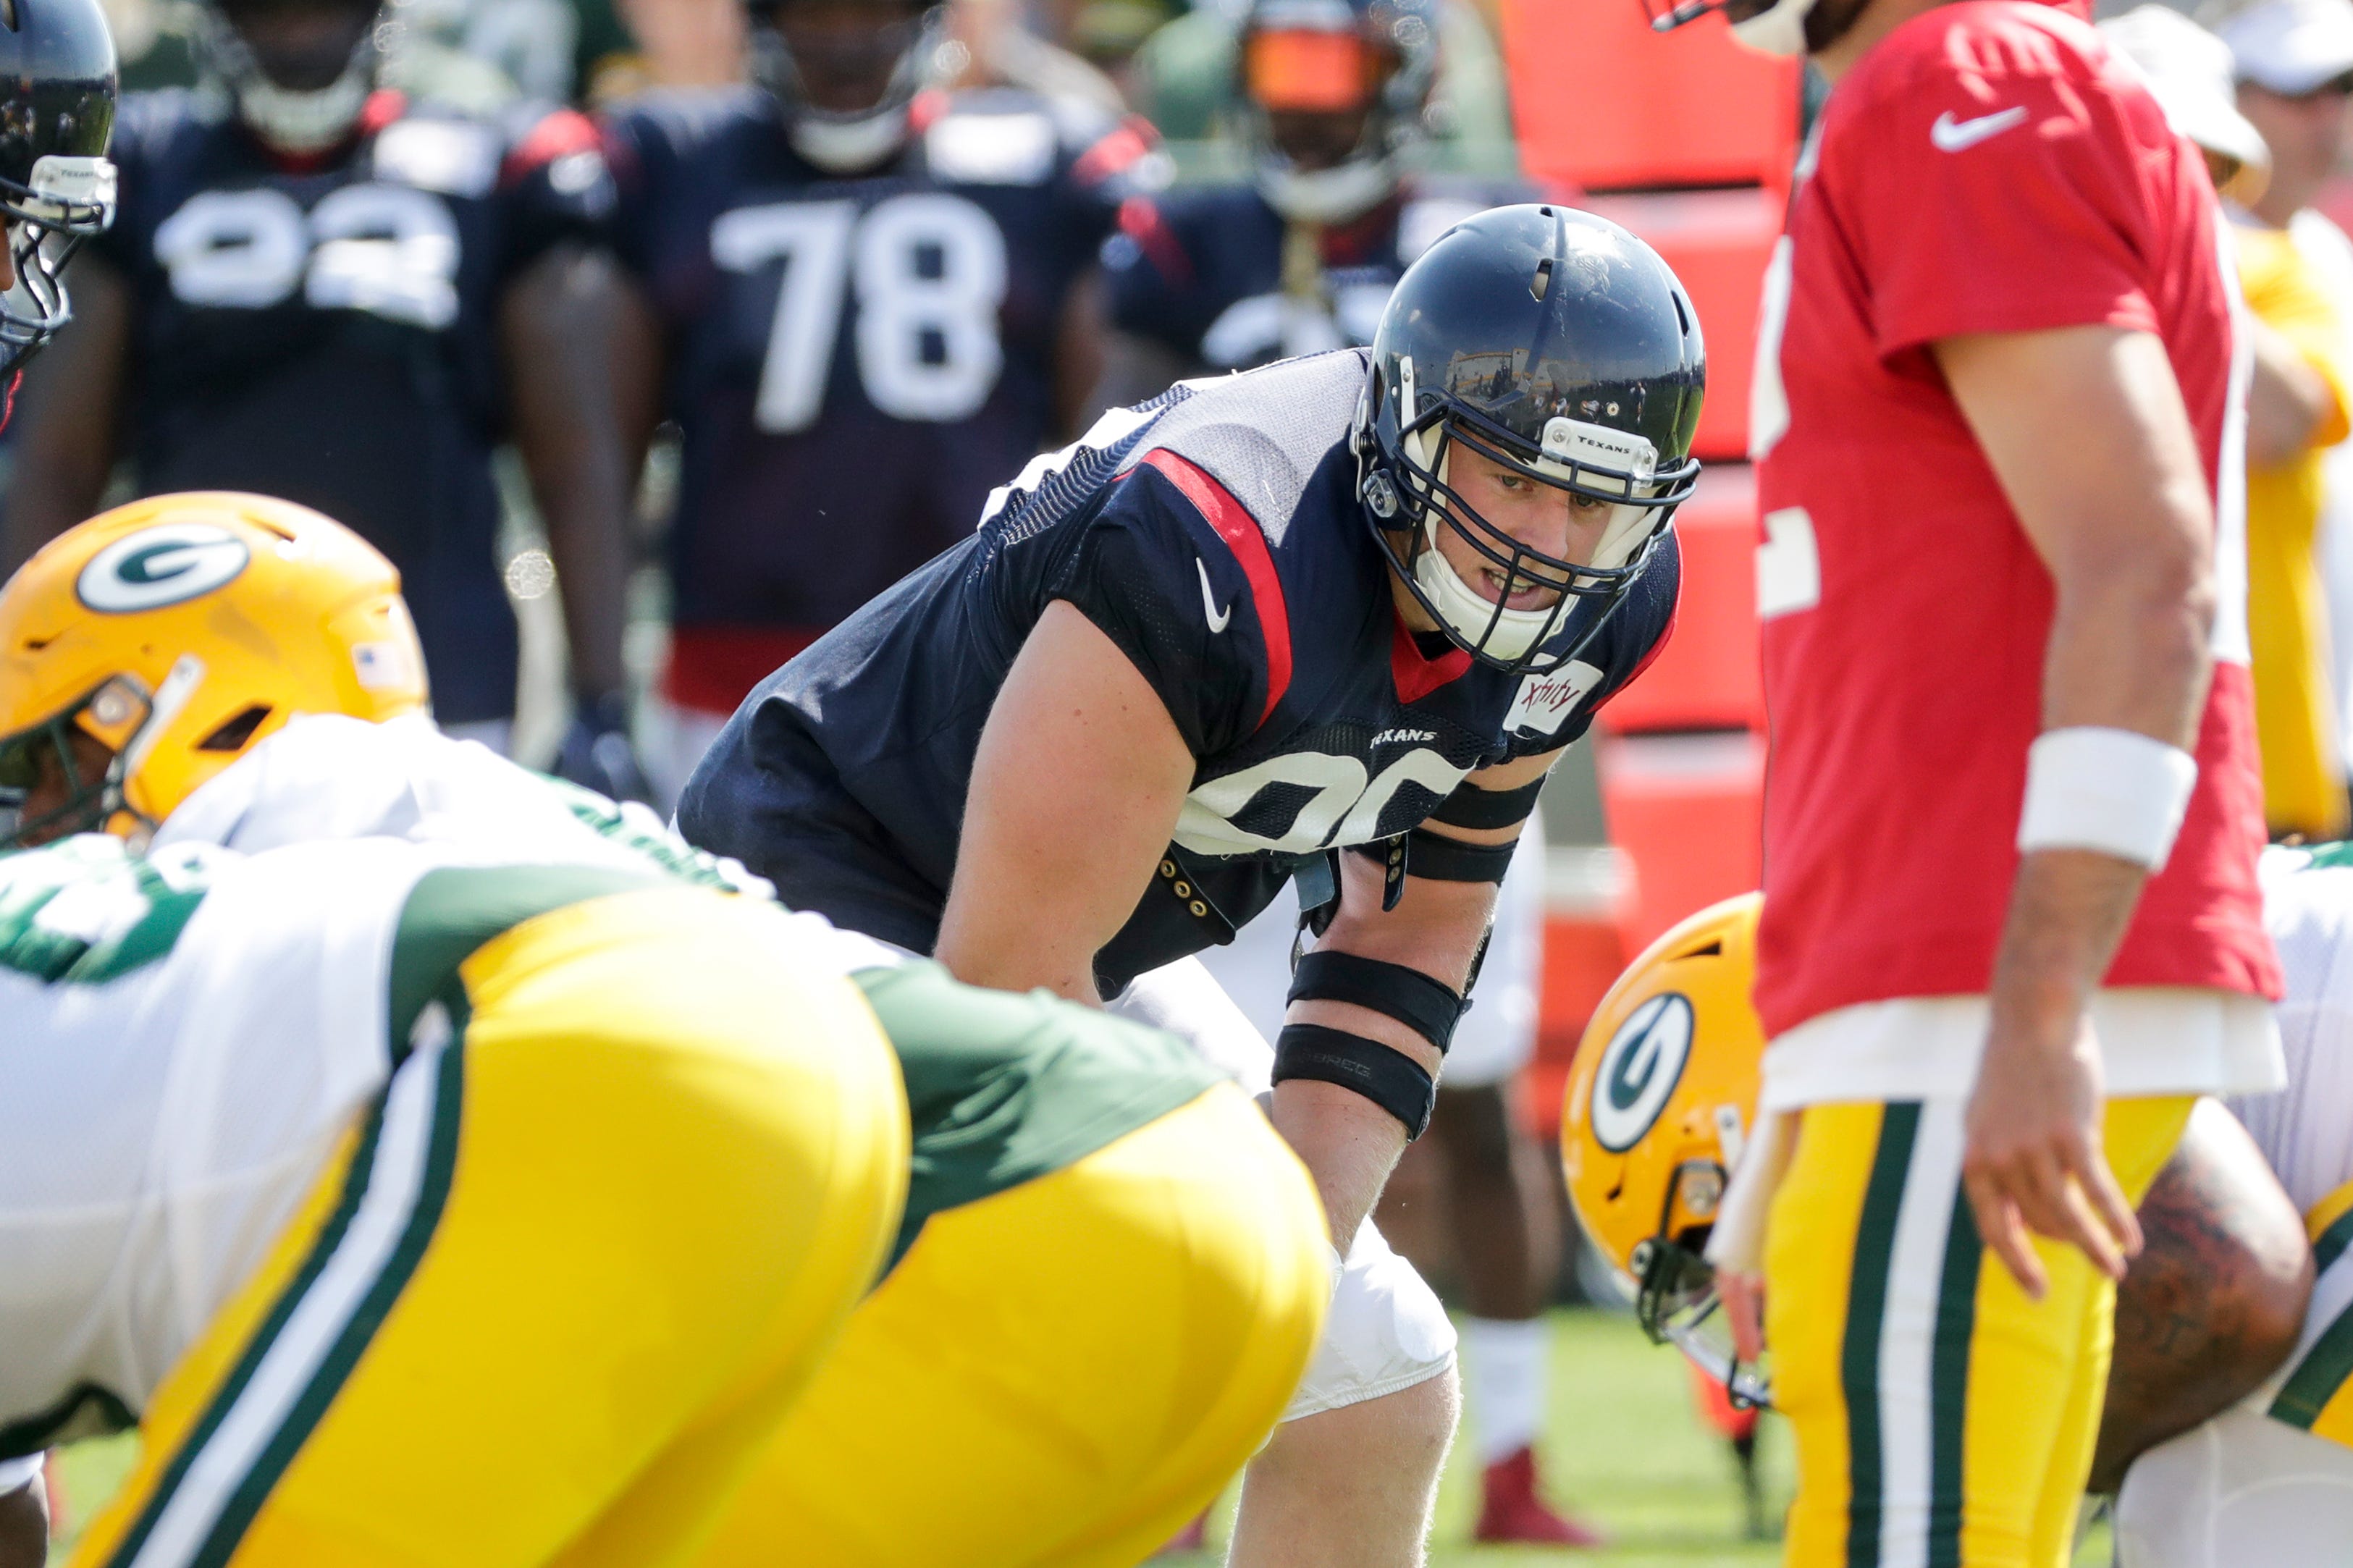 Texans defensive end J. J. Watt (99) lines up for a scrimmage during a joint training camp practice with the Green Bay Packers at Ray Nitchske Field Monday, August 5, 2019, in Ashwaubenon, Wis.